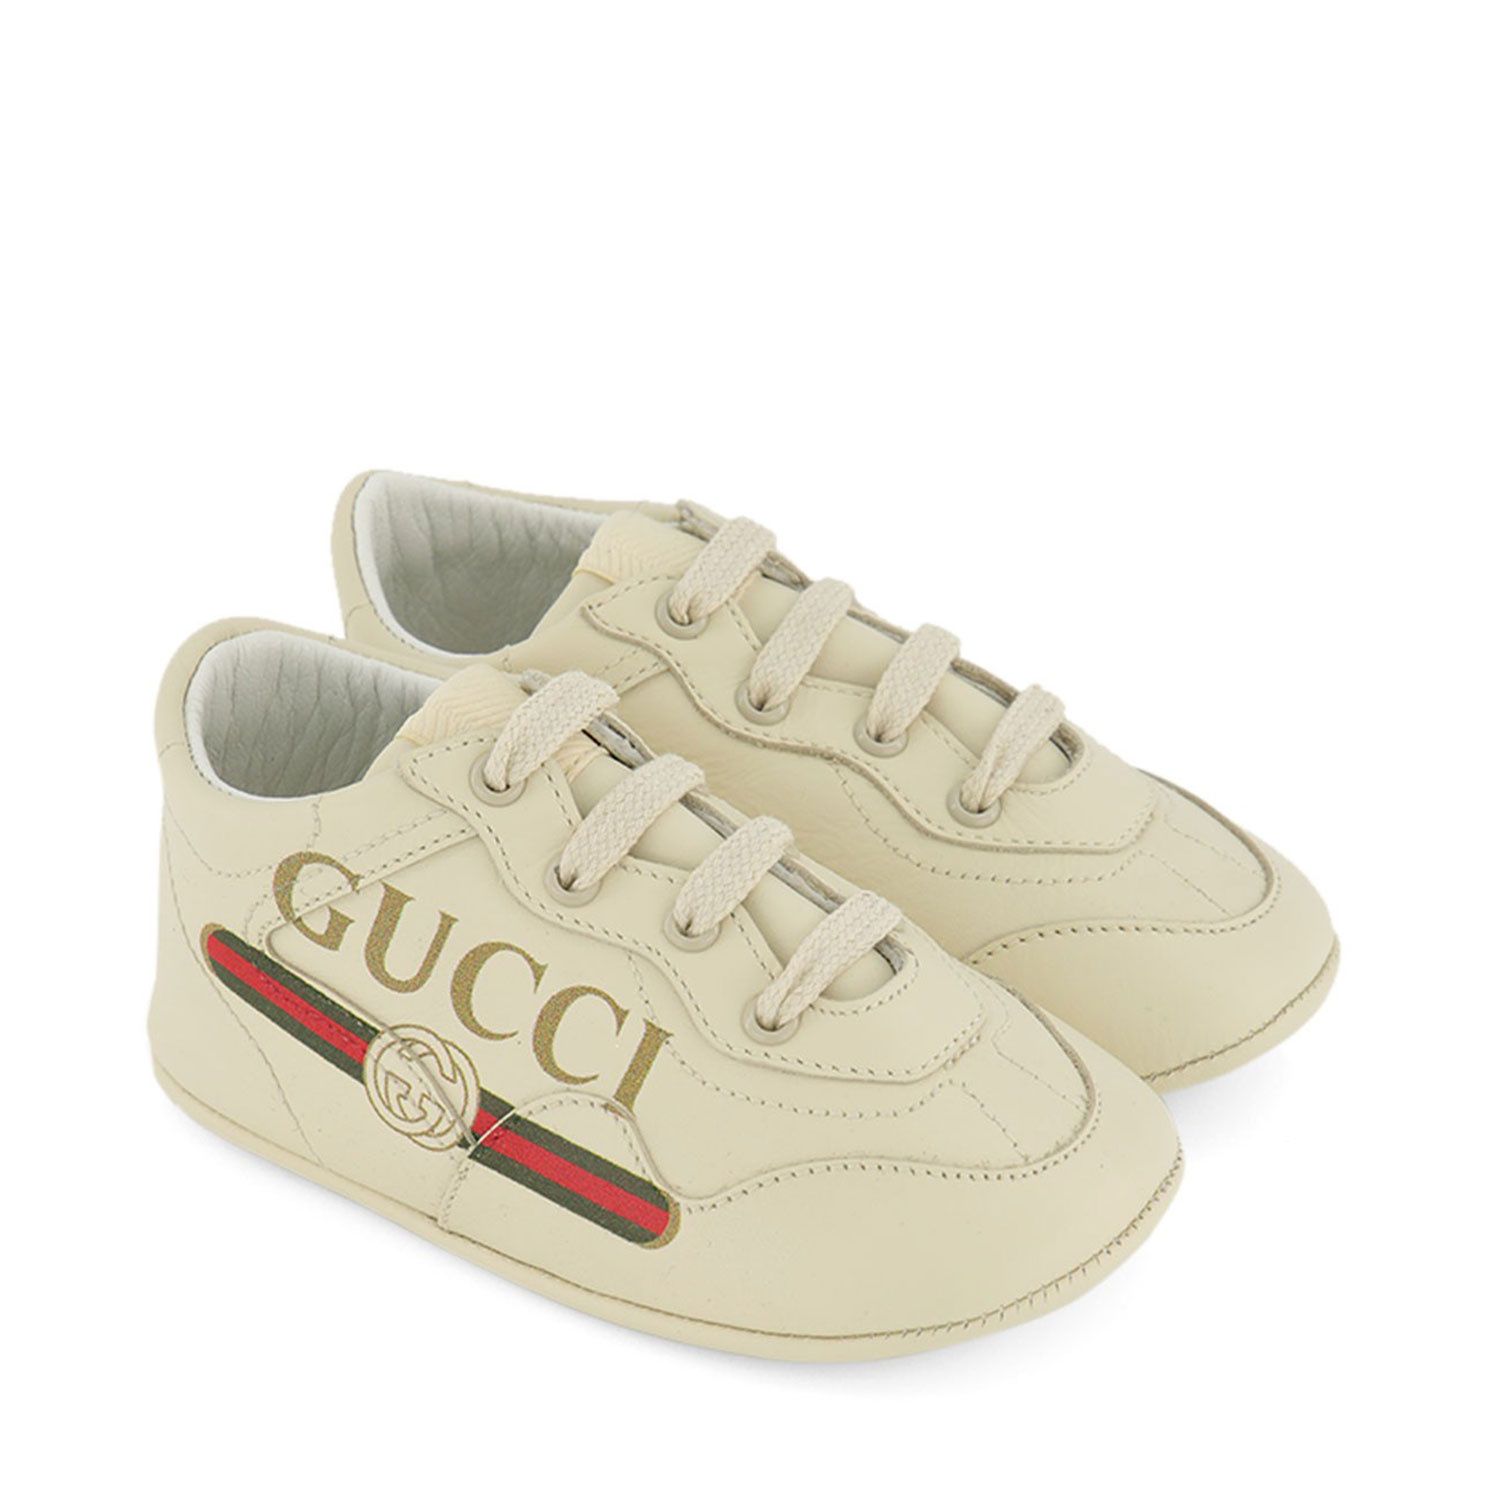 gucci baby shoe